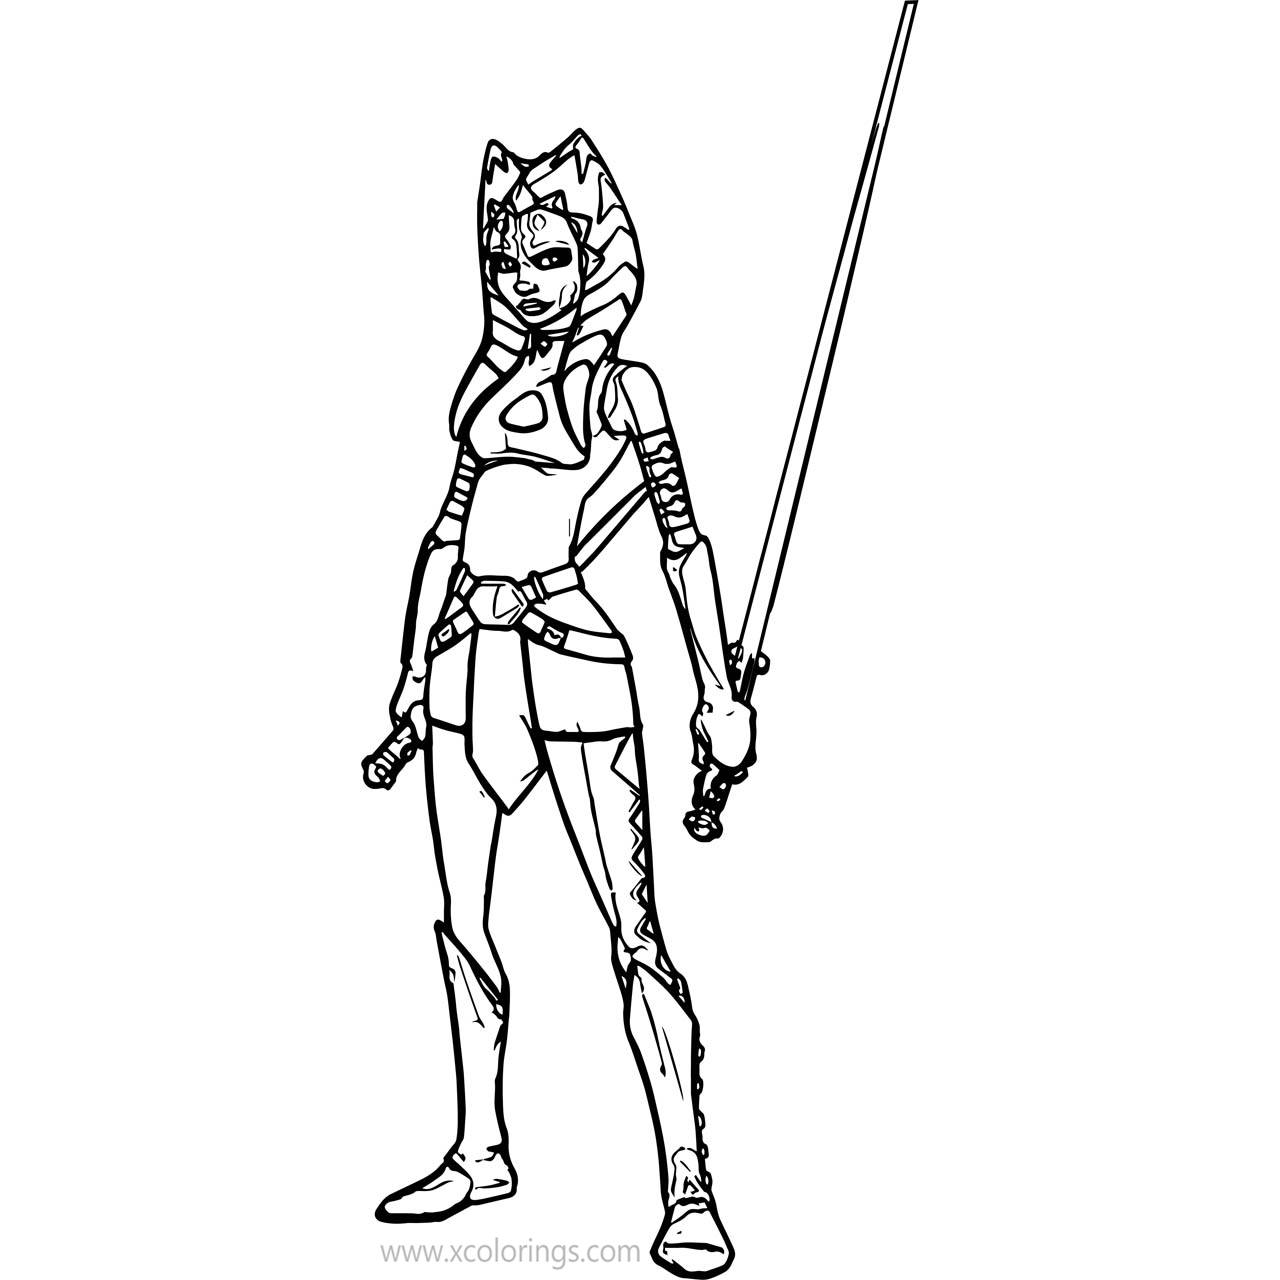 Free Ahsoka Tano Coloring Pages Ready to Fight printable